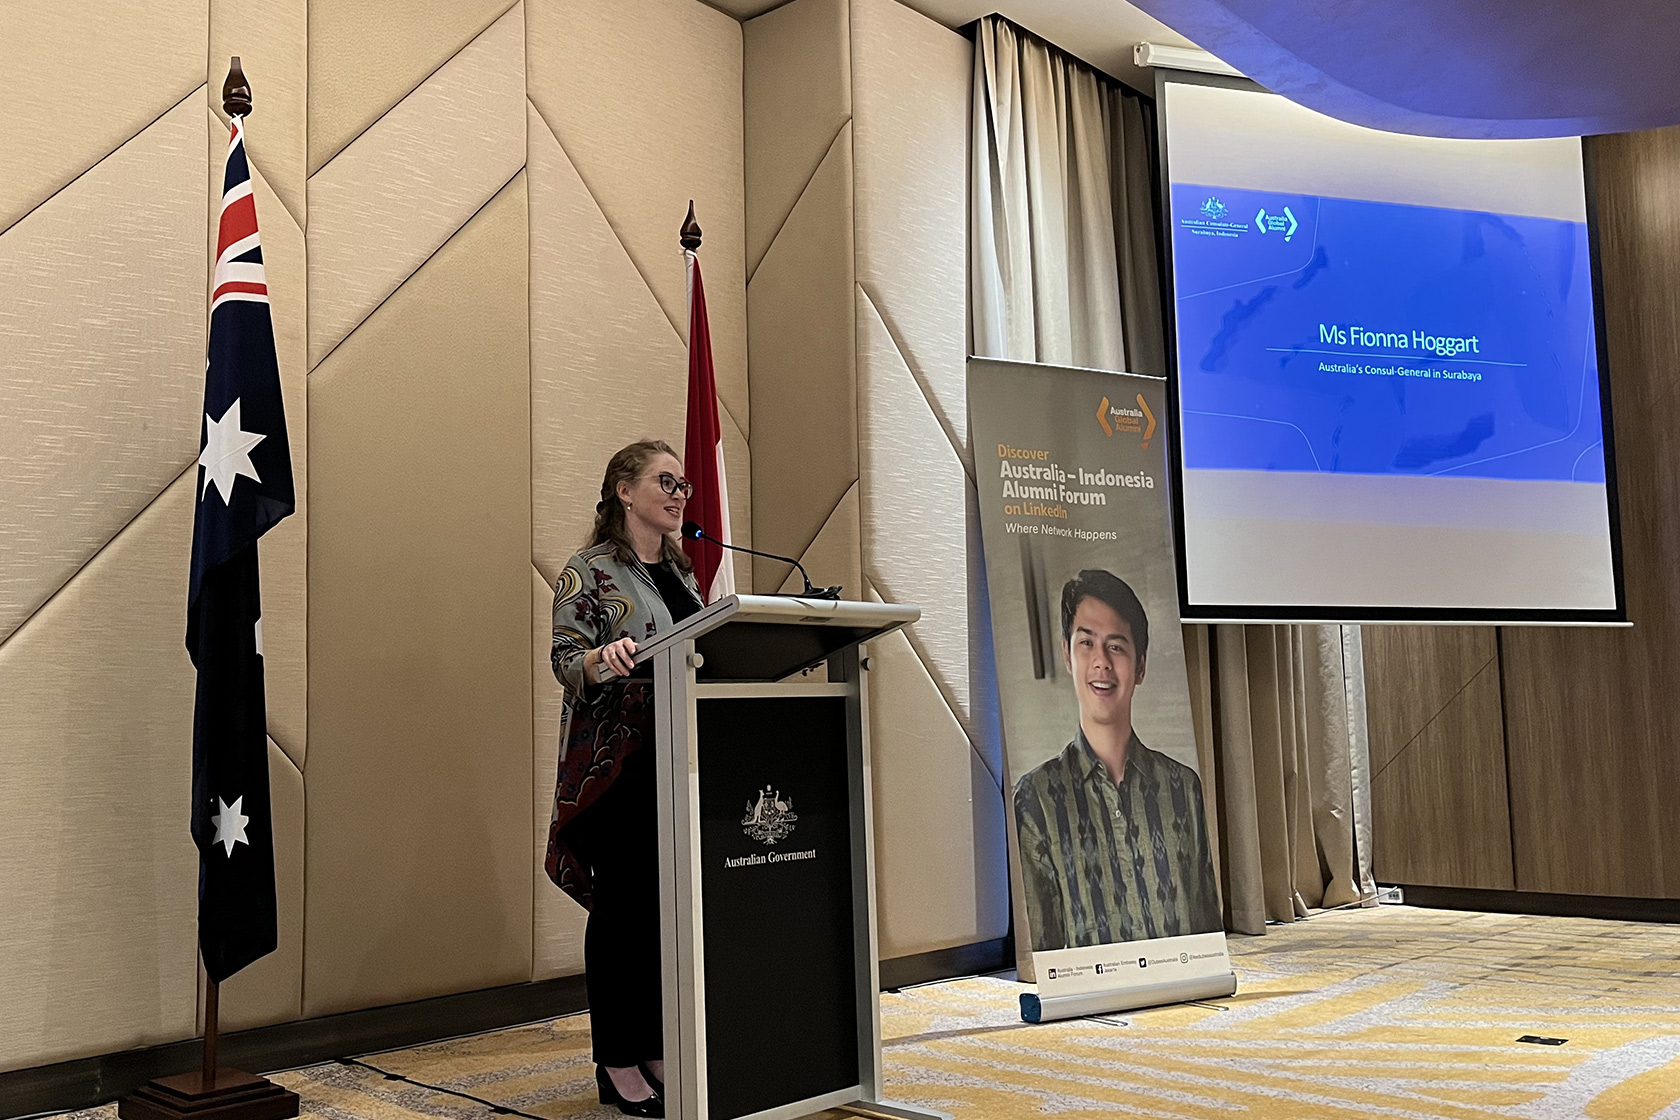 Ms Fiona Hoggart, Australia's Consul-General in Surabaya, delivers captivating opening remarks, setting the stage for an evening brimming with cultural exchange, camaraderie, and celebration.